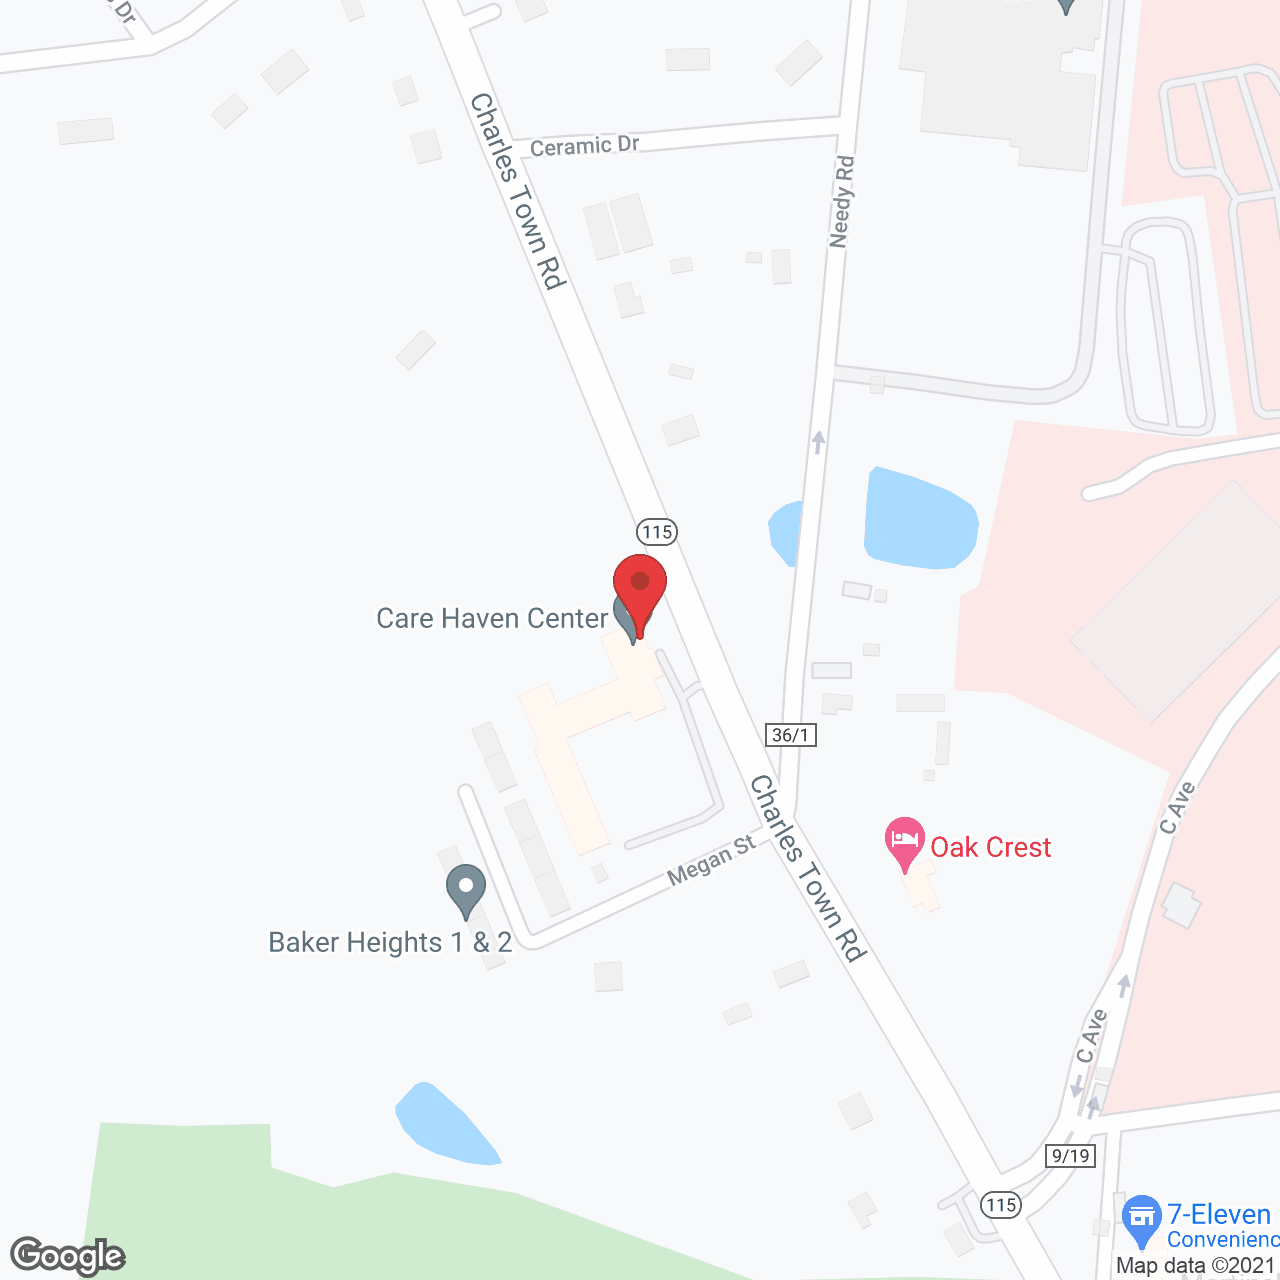 Care Haven Center in google map